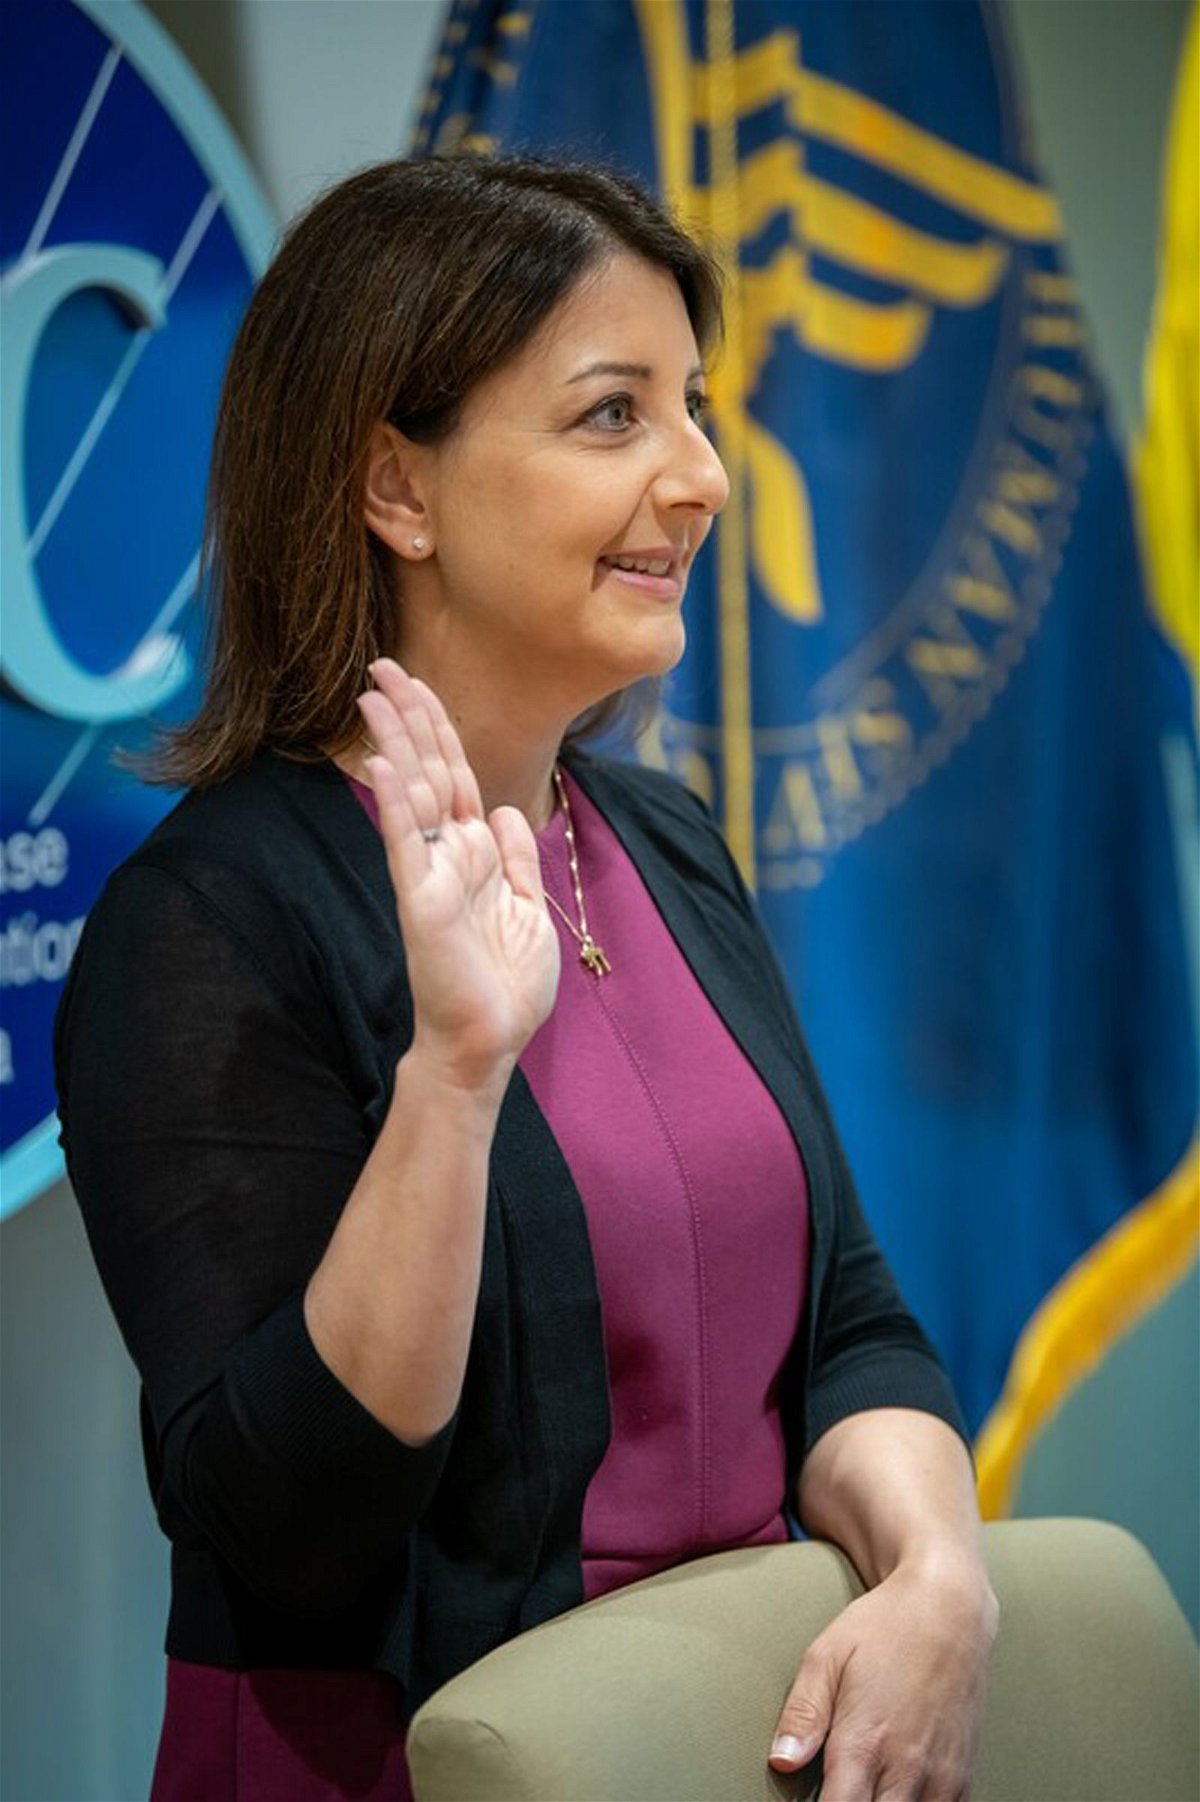 <i>Mandy Cohen/Twitter</i><br/>Dr. Mandy Cohen was sworn in as the 20th director of the US Centers for Disease Control and Prevention.